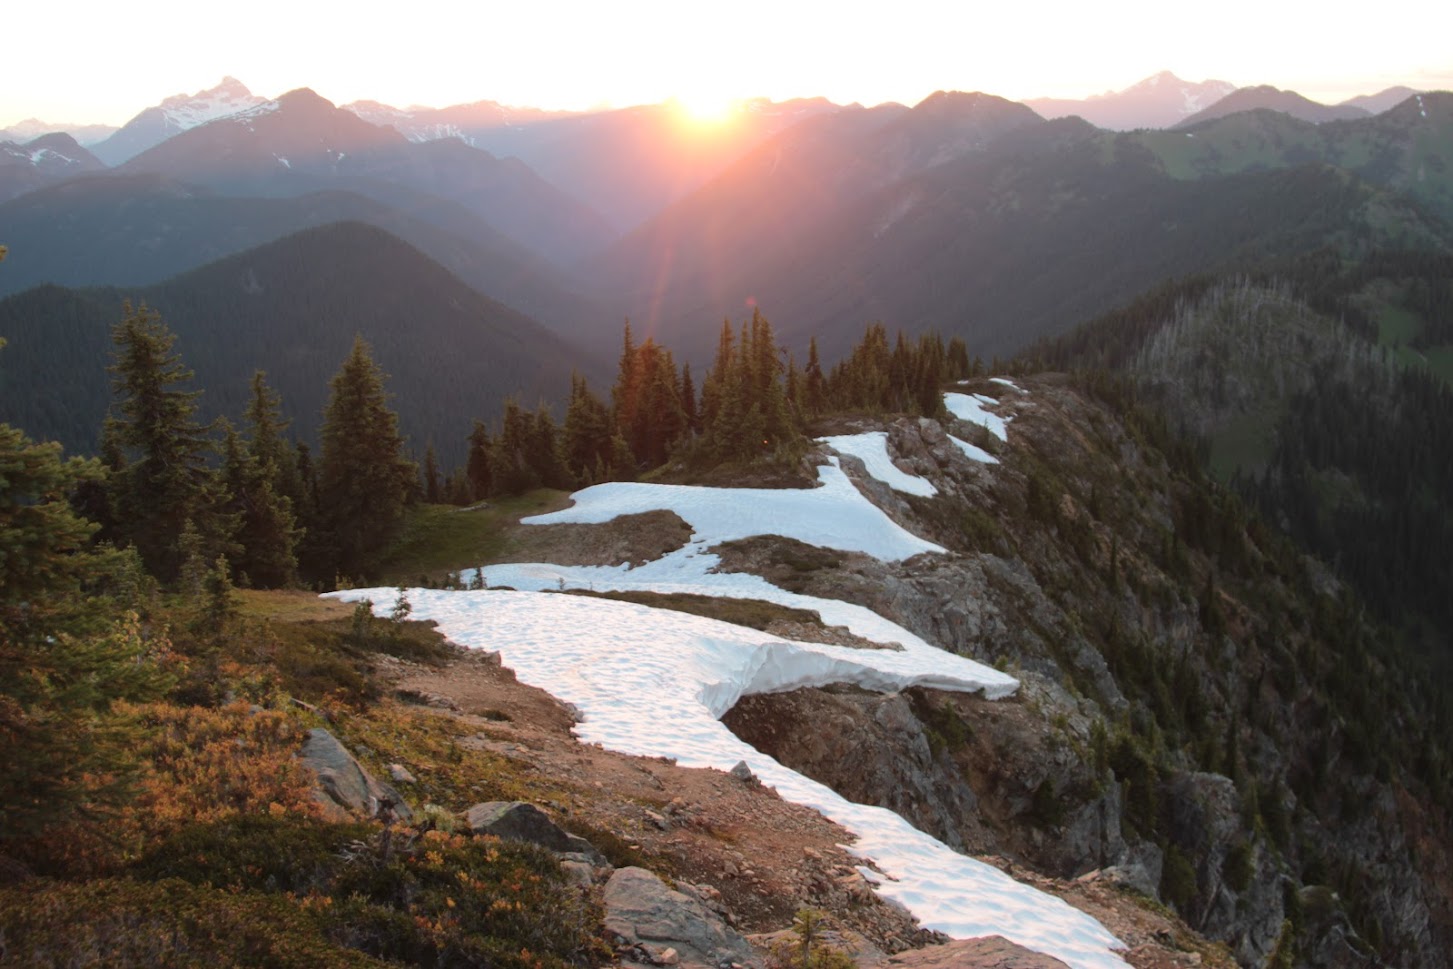 View down the 26 Mile Valley in the Skagit Headwaters Donut Hole from Porcupine Peak. Photo credit: Wilderness Committee